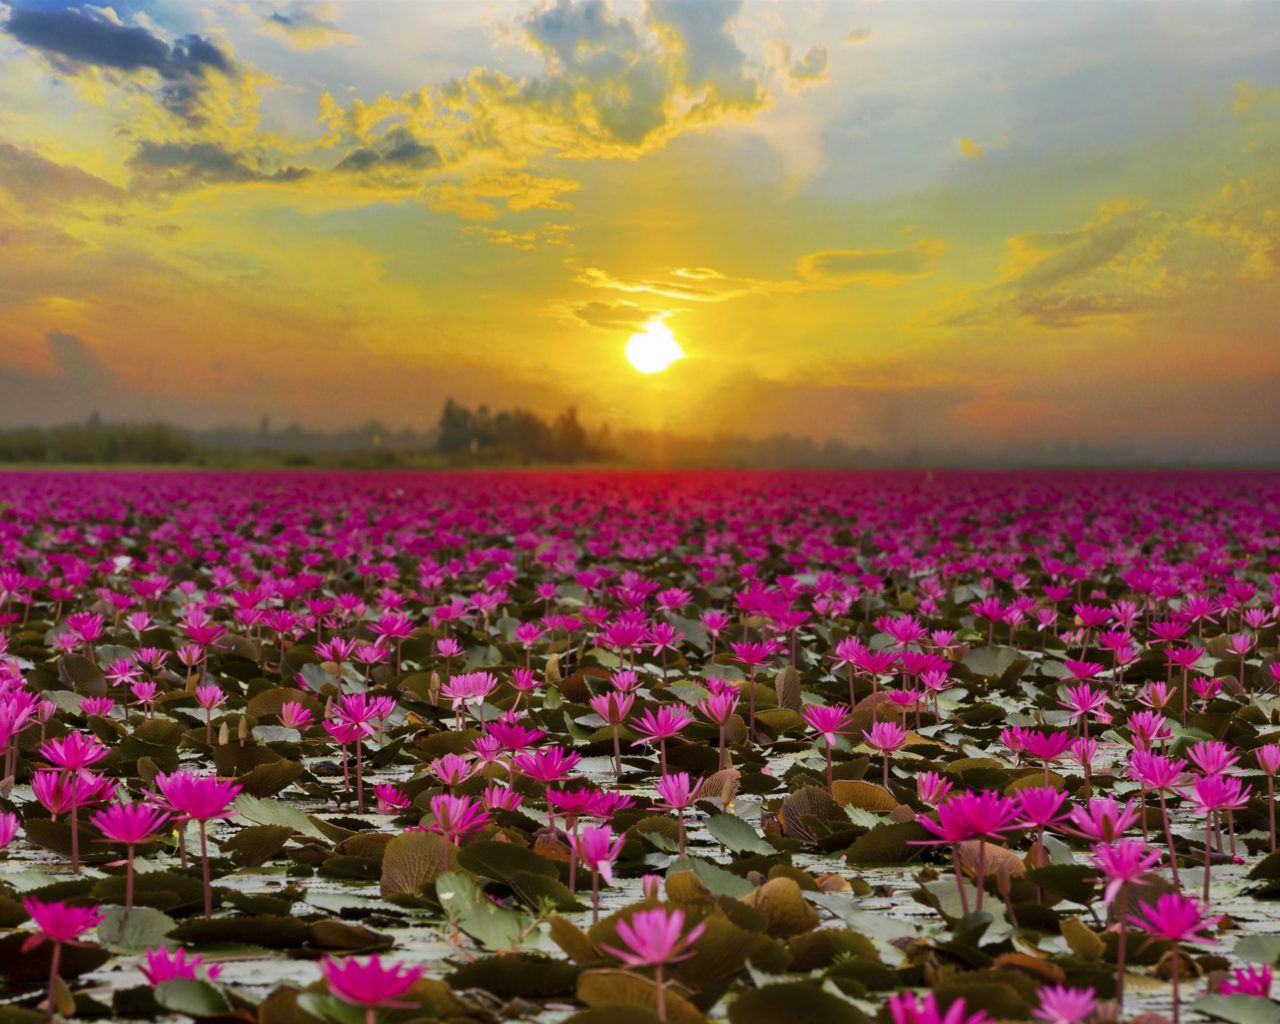 1280x1024 Lake Lotus Lake In Udon Thani Thailand Tropical Flower Garden Home Of Millions Of Lotus Flowers Sunset Landscape Wallpaper For Desktop 3840x2160